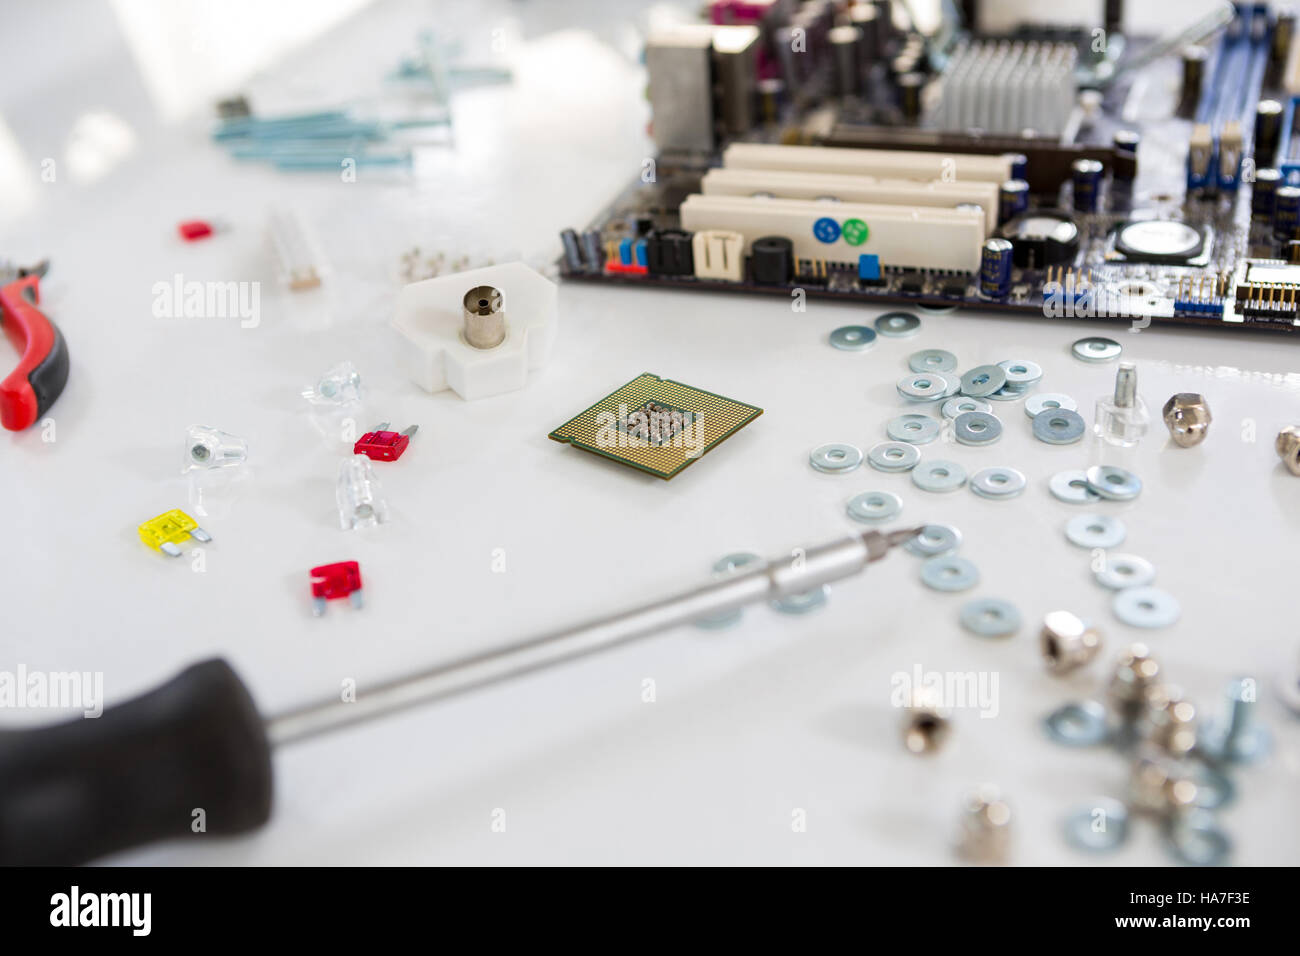 Spare parts of motherboard Stock Photo